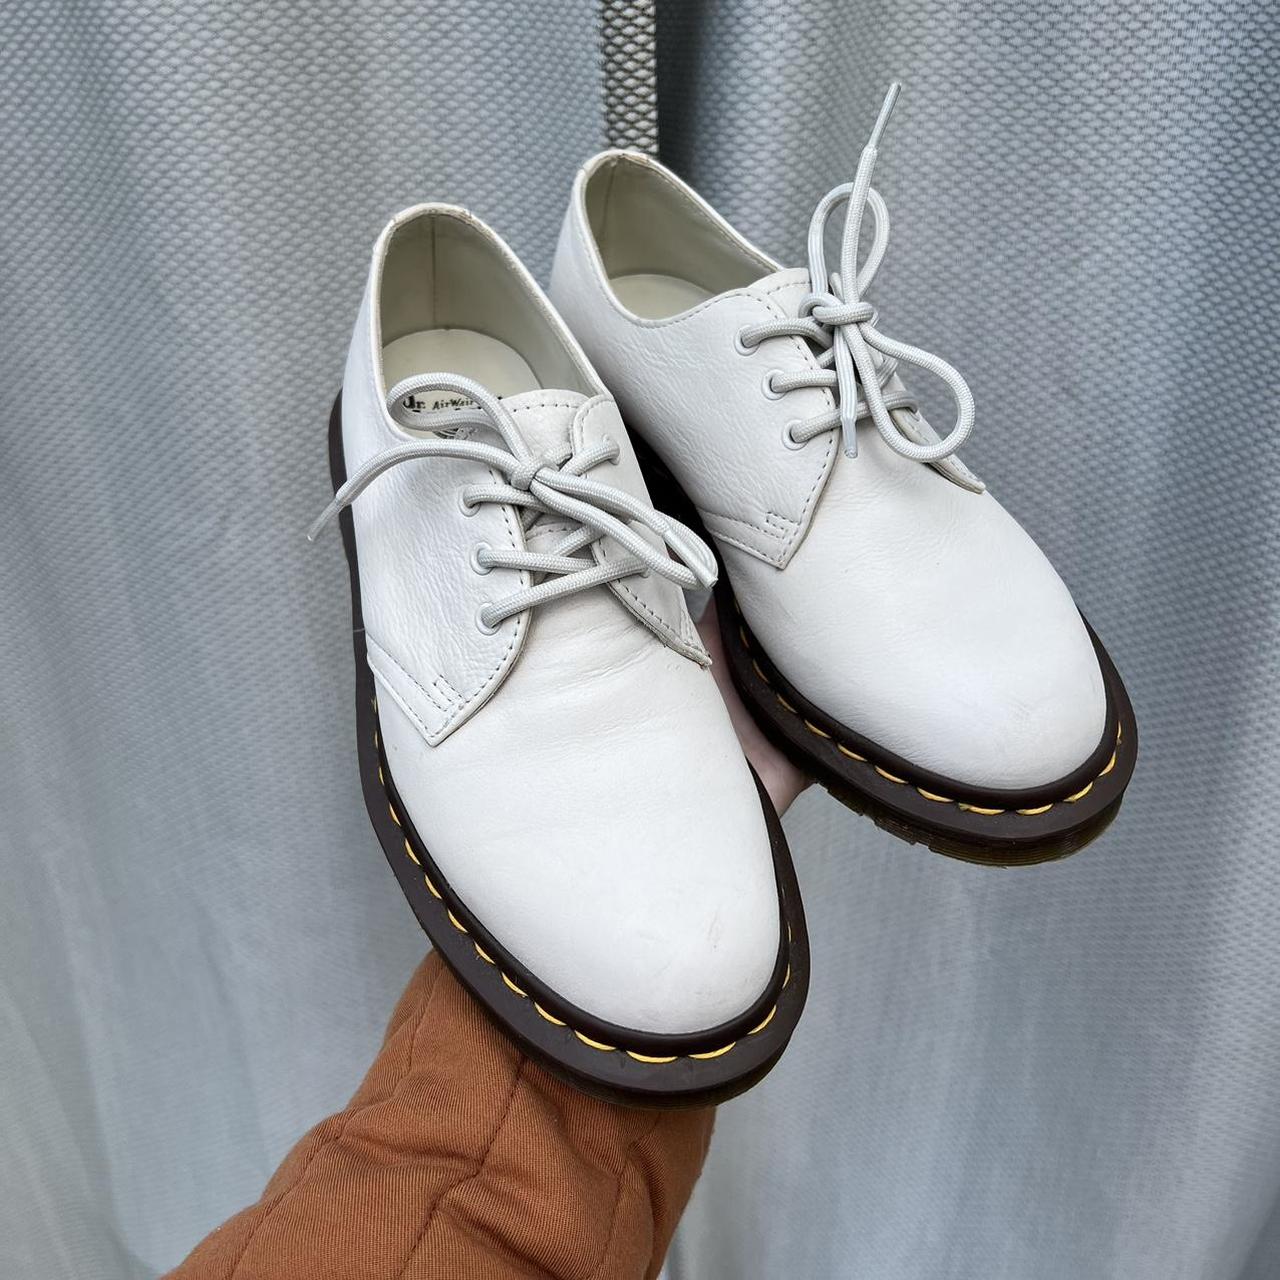 Dr. Martens Women's White and Cream Oxfords